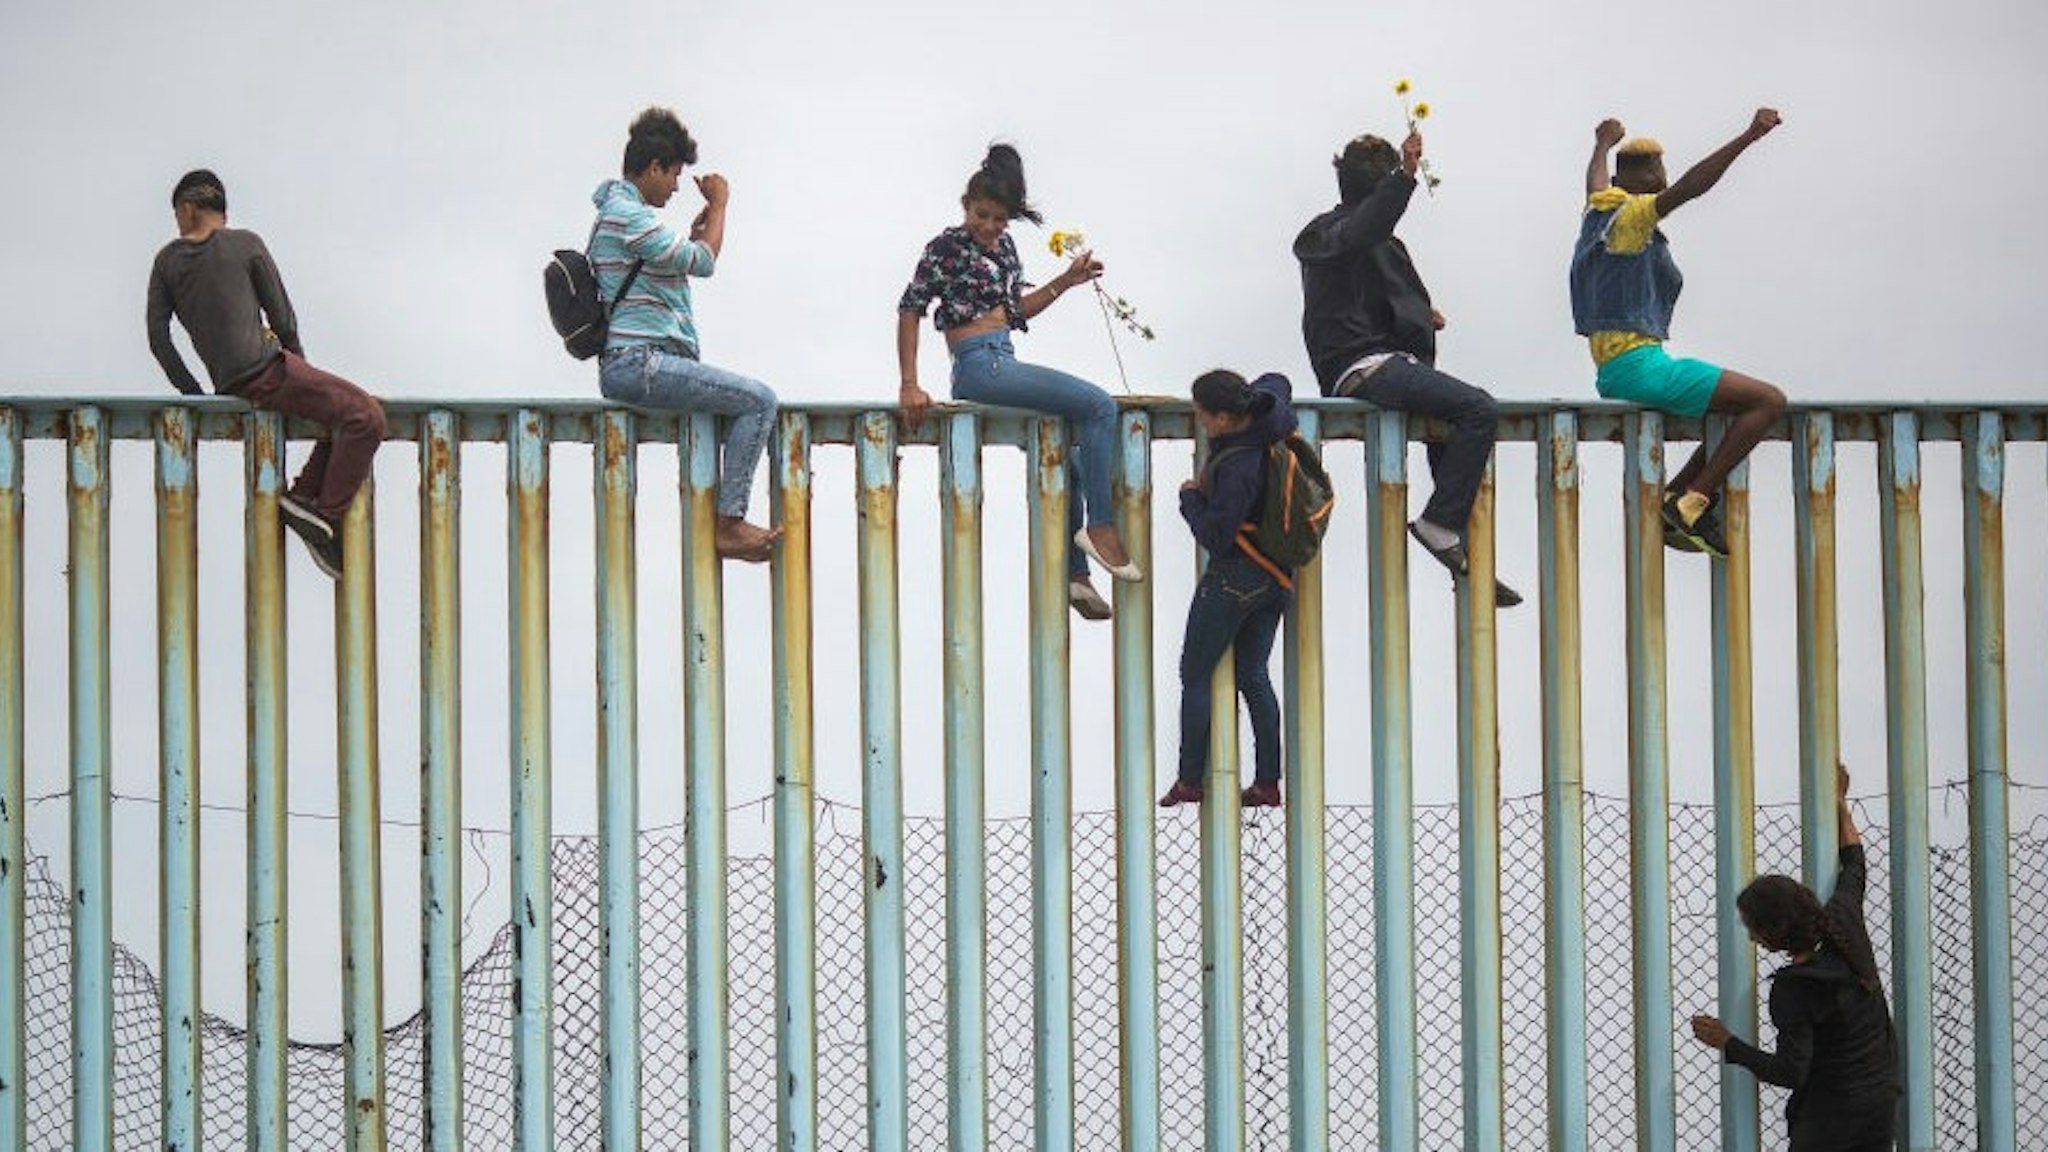 People climb a section of border fence to look toward supporters in the U.S. as members of a caravan of Central American )